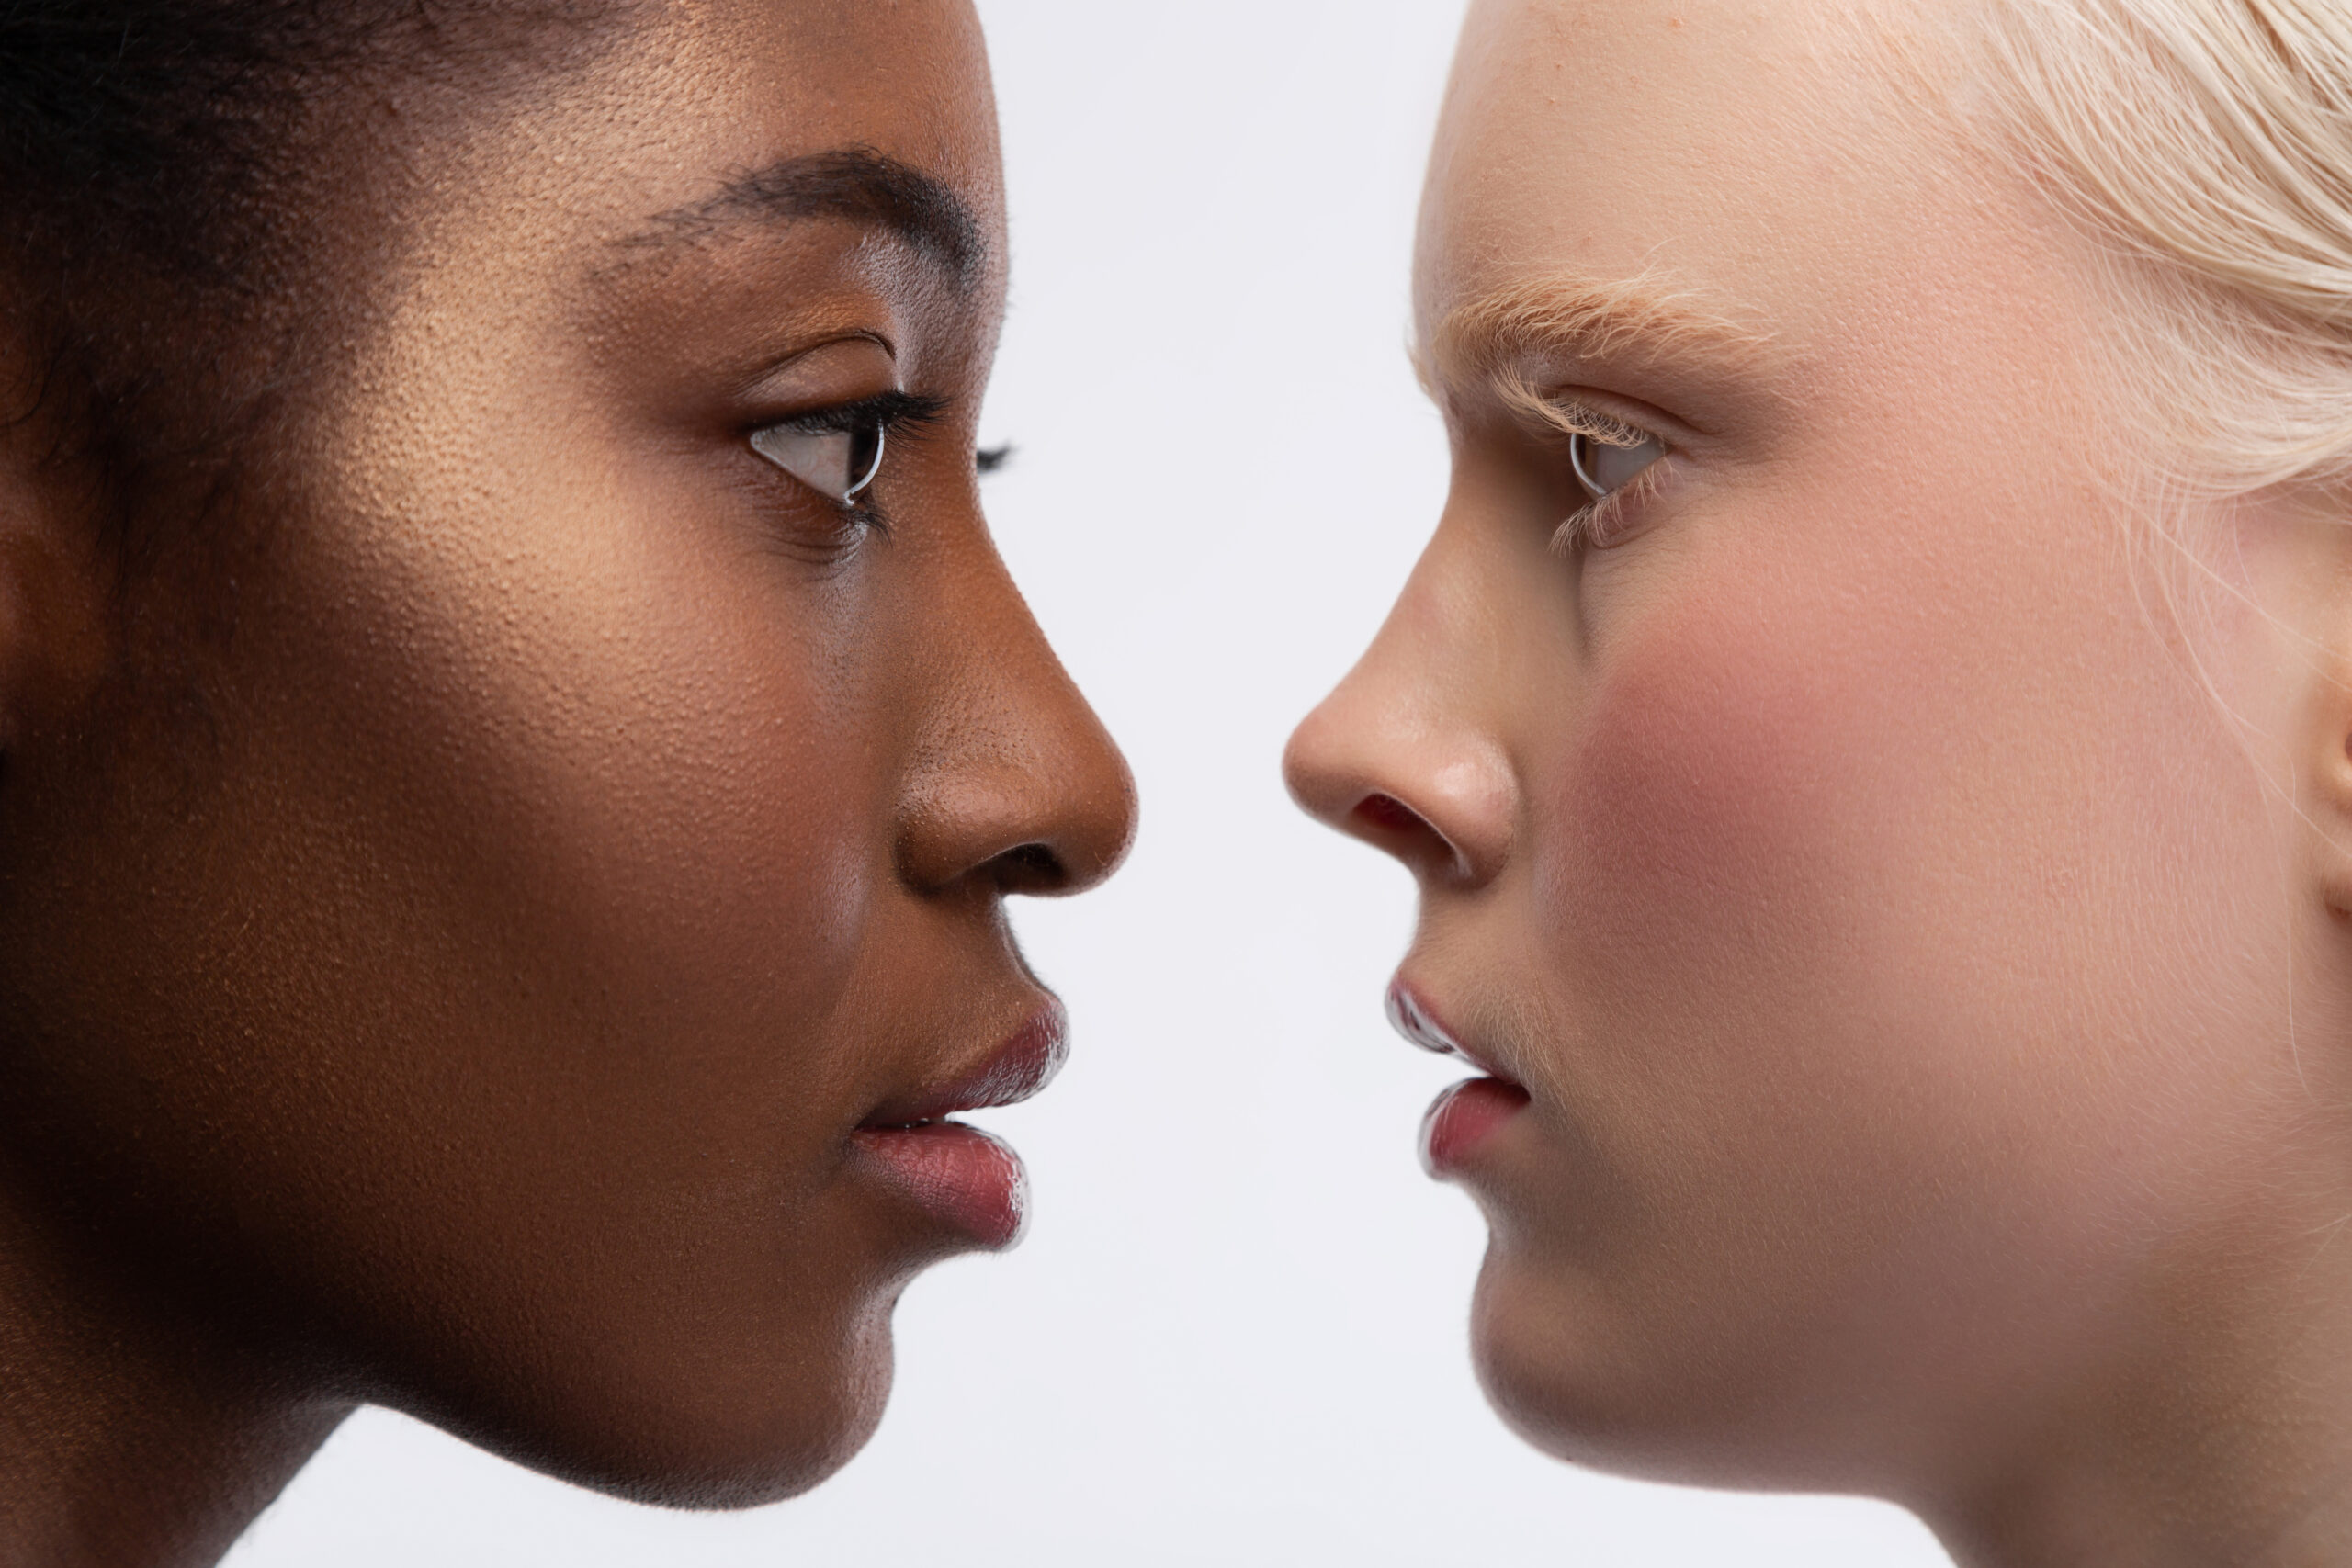 Looking into eyes. Two young multinational women with different skin color looking into eyes of each other